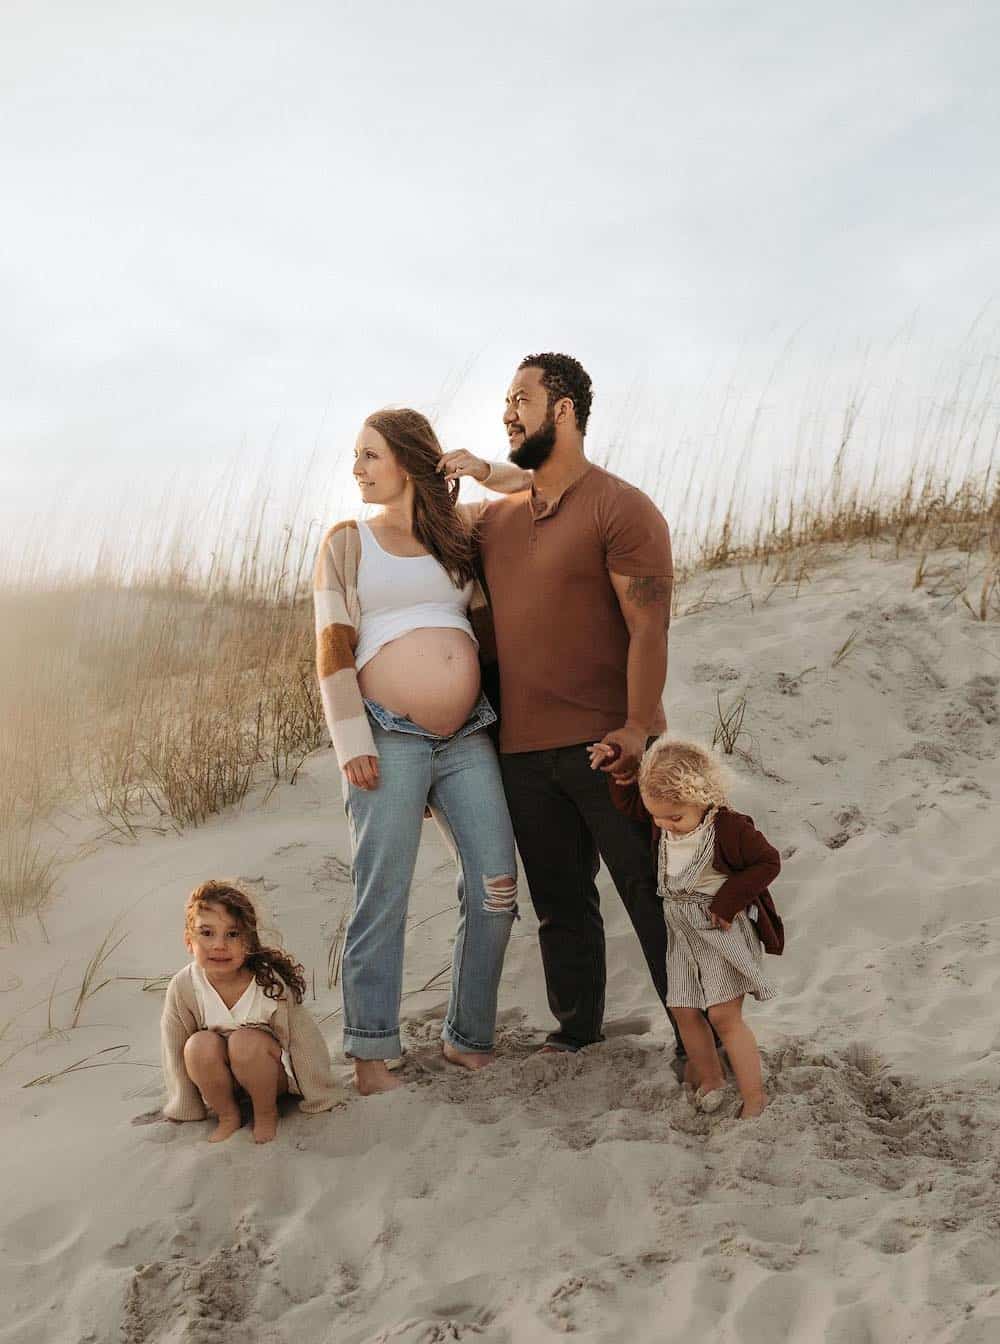 family on a beach for a photoshoot wearing netural colors including brown, white, and beige